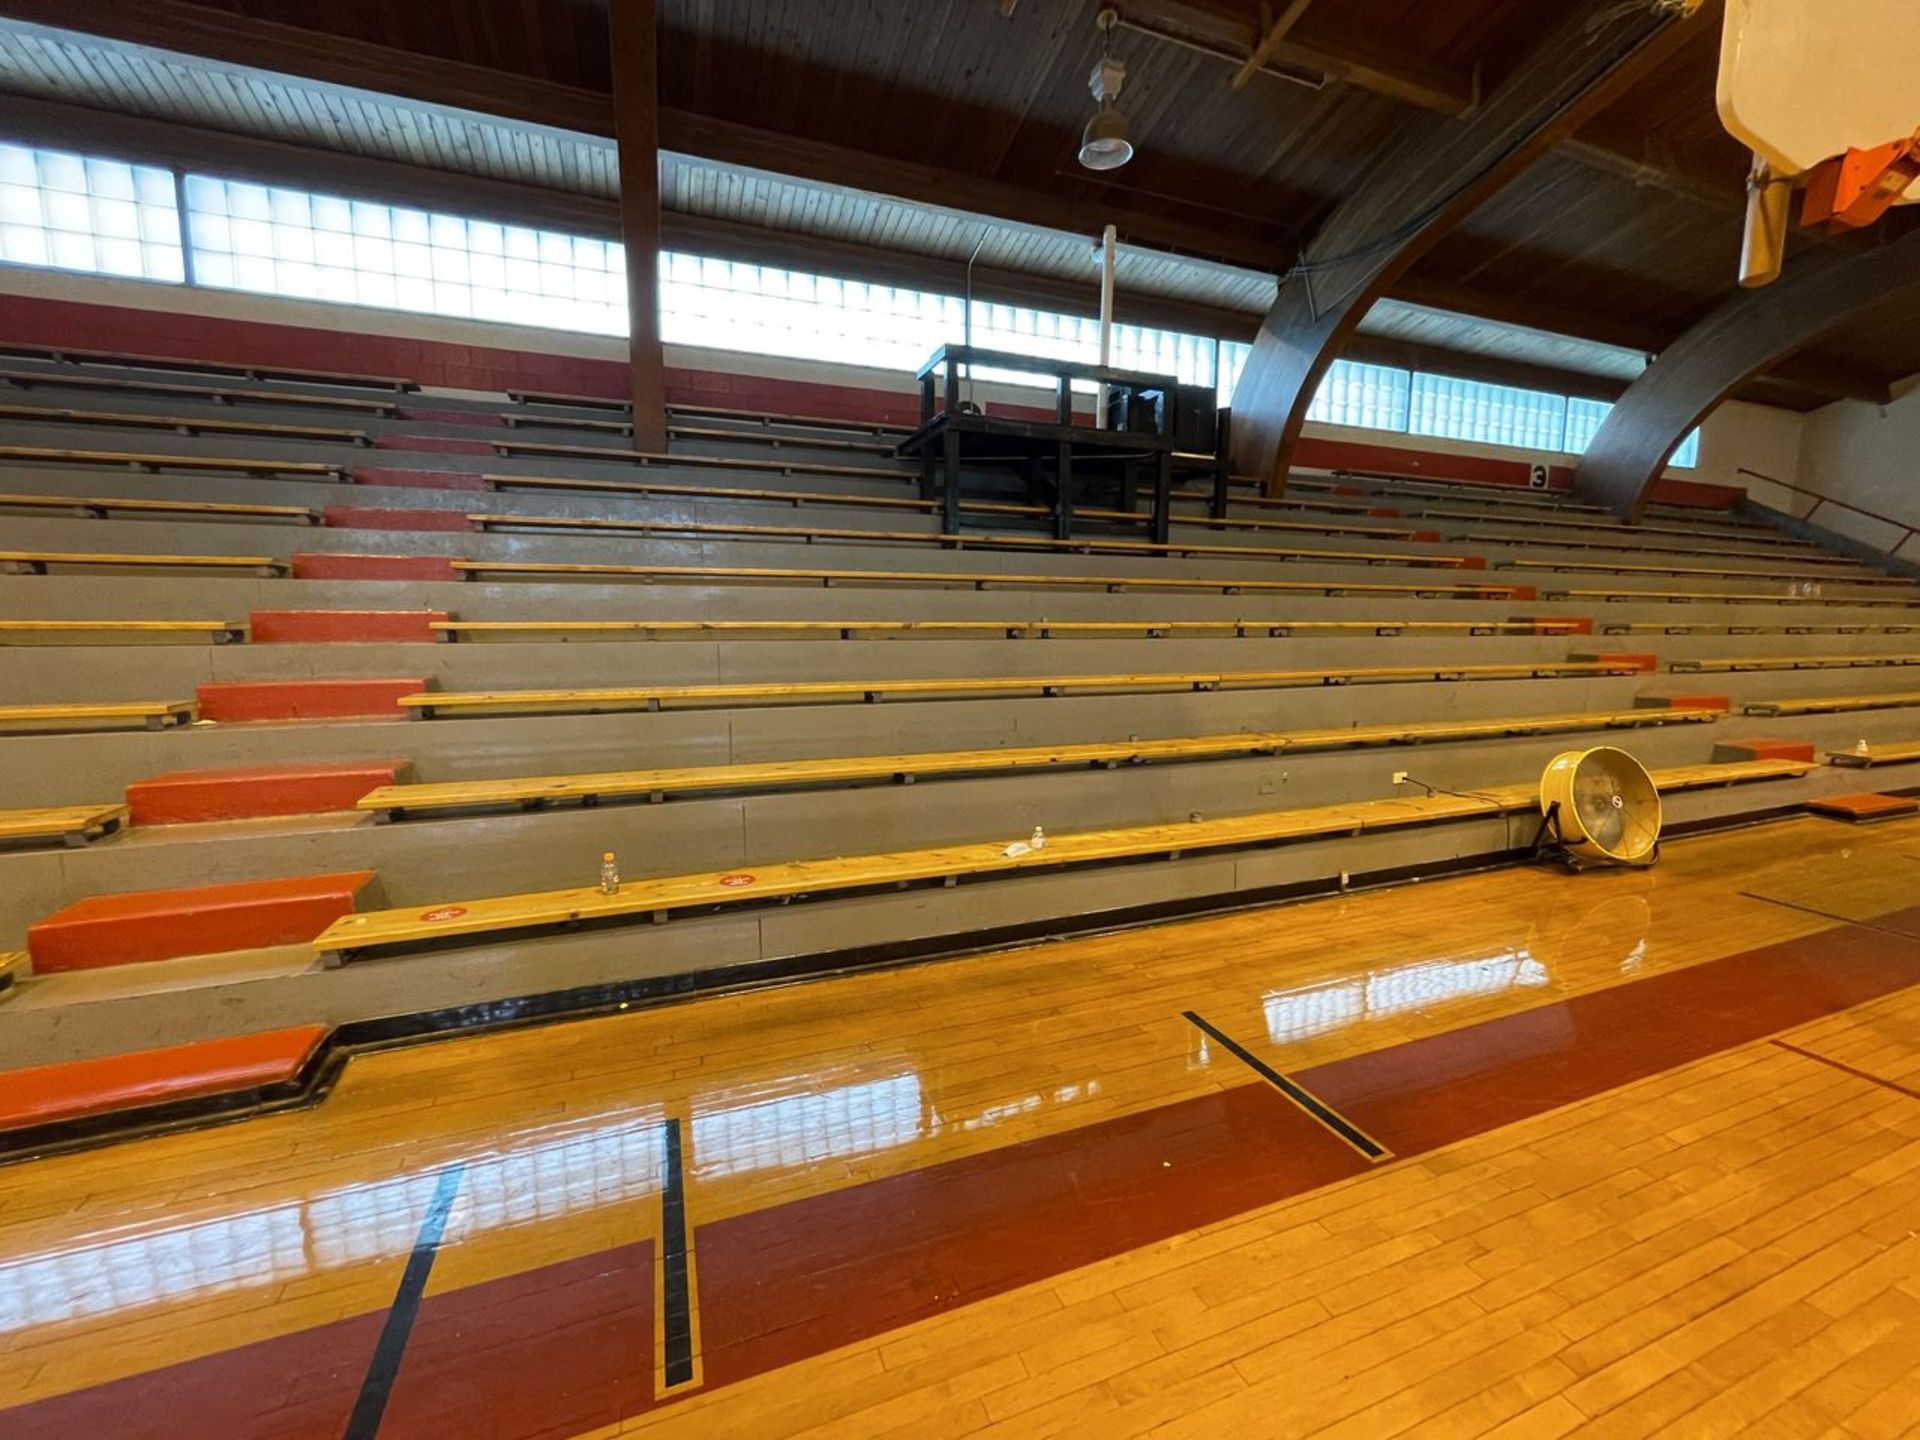 Lot - (58) 10 in. x 16 ft. Wood Benches Mounted on Permanent Bleachers (Gym) - Image 2 of 3